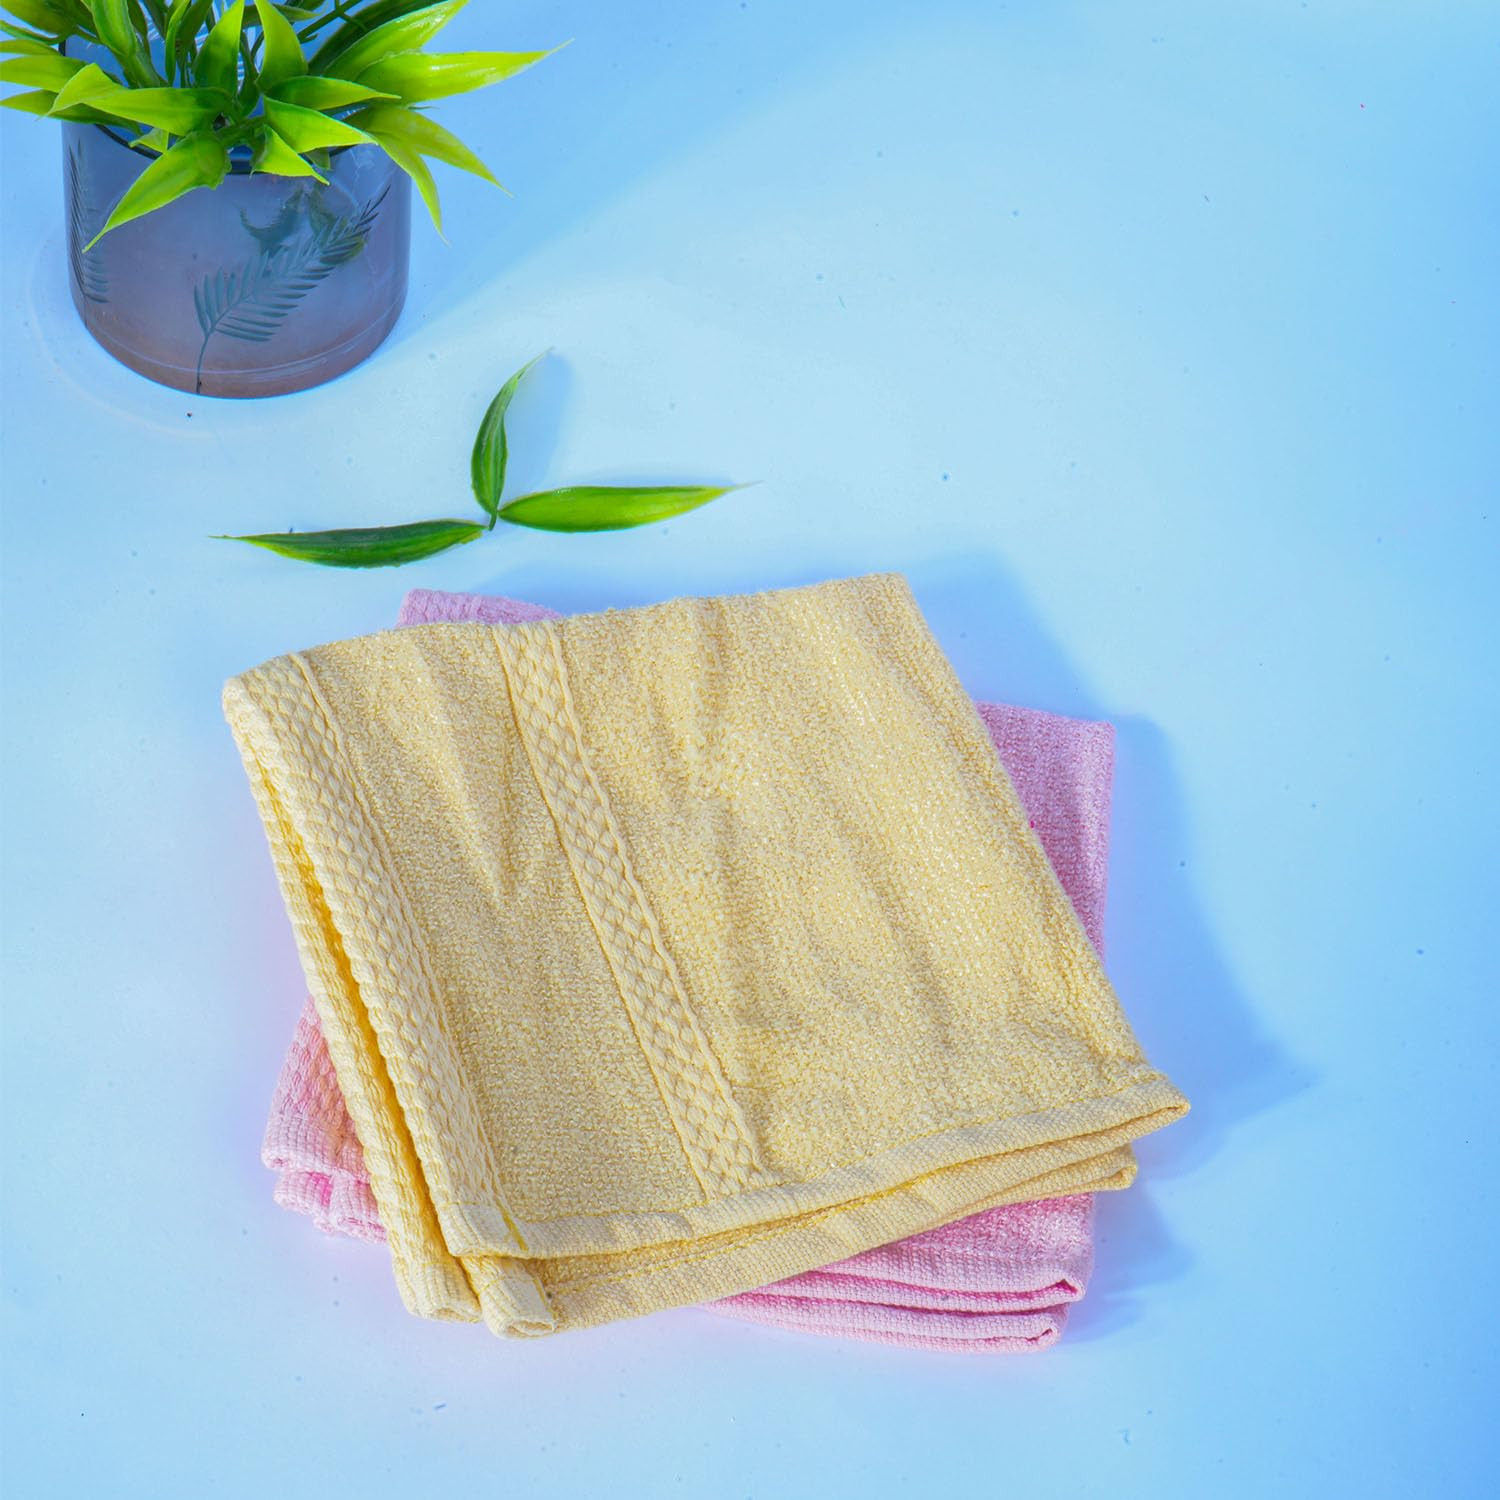 Kuber Industries Bamboo Face towels |Super Soft, Quick Absorbent & Anti-Bacterial|Gym & Workout Towels|Pack of 2 (Yellow & Pink)